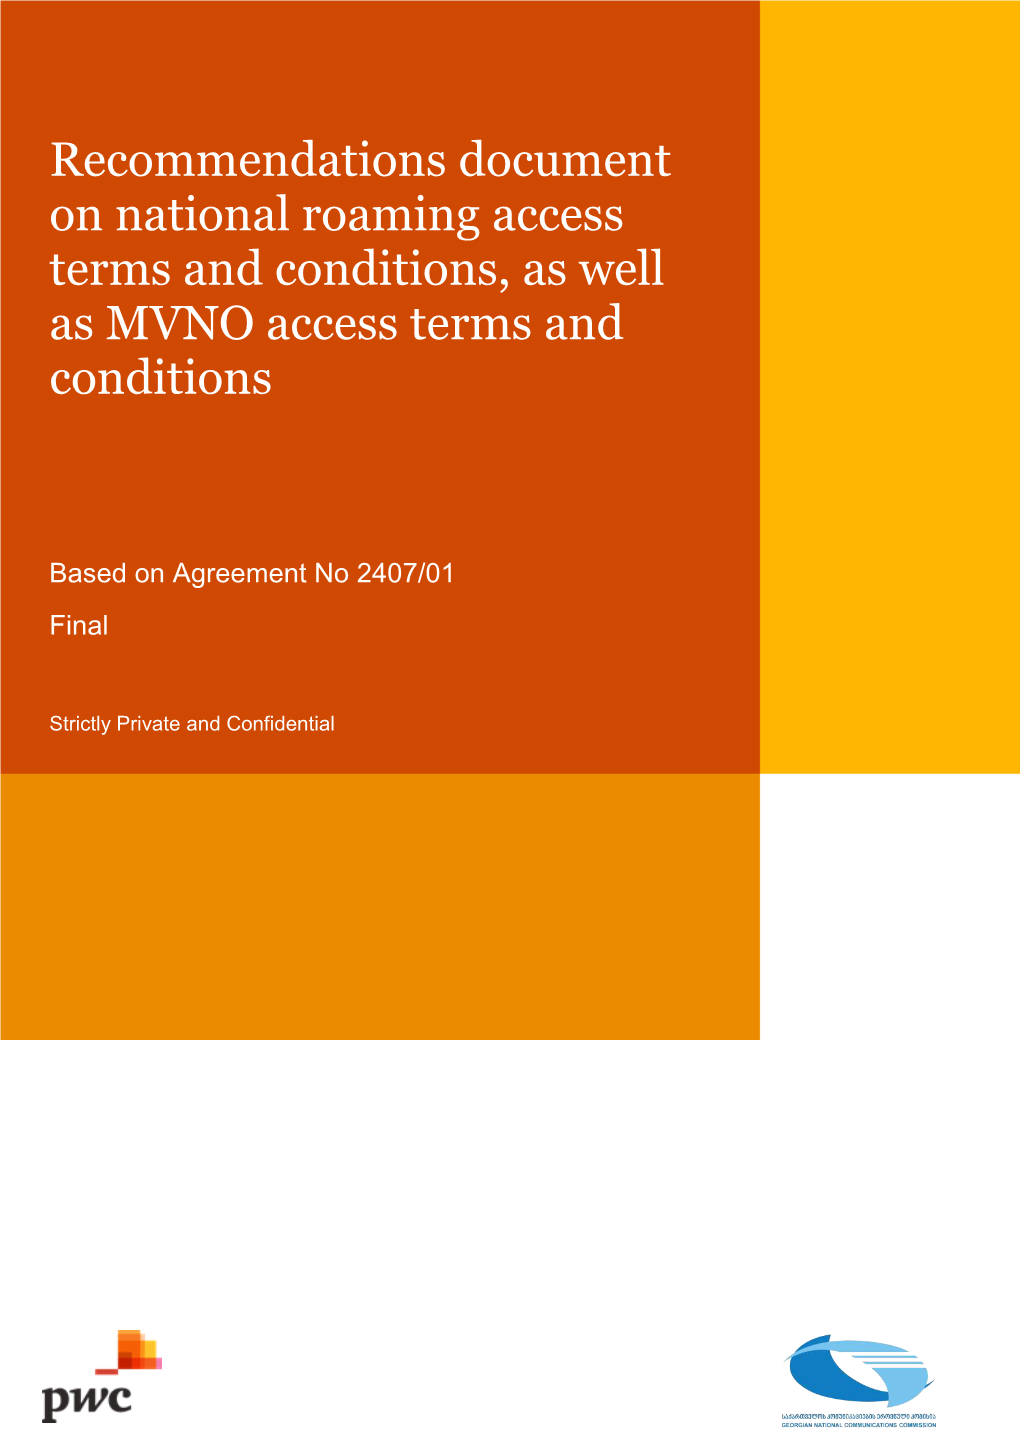 Recommendations Document on National Roaming Access Terms and Conditions, As Well As MVNO Access Terms and Conditions